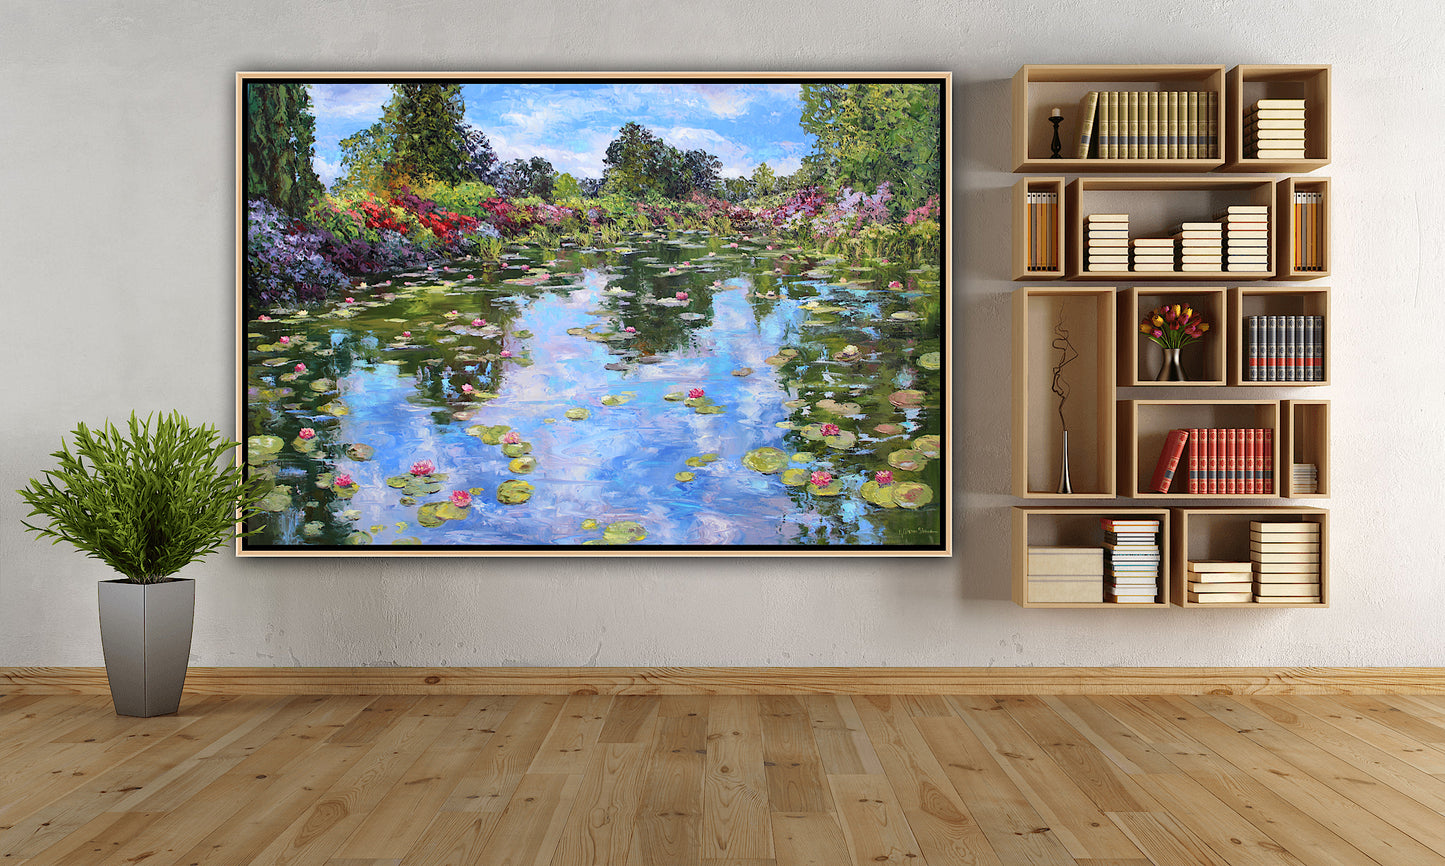 Extra Large Water Lily Painting, "An Ode To Monet", Garden Landscape Of Monet's Pond, 40" x 60" Oil On Canvas